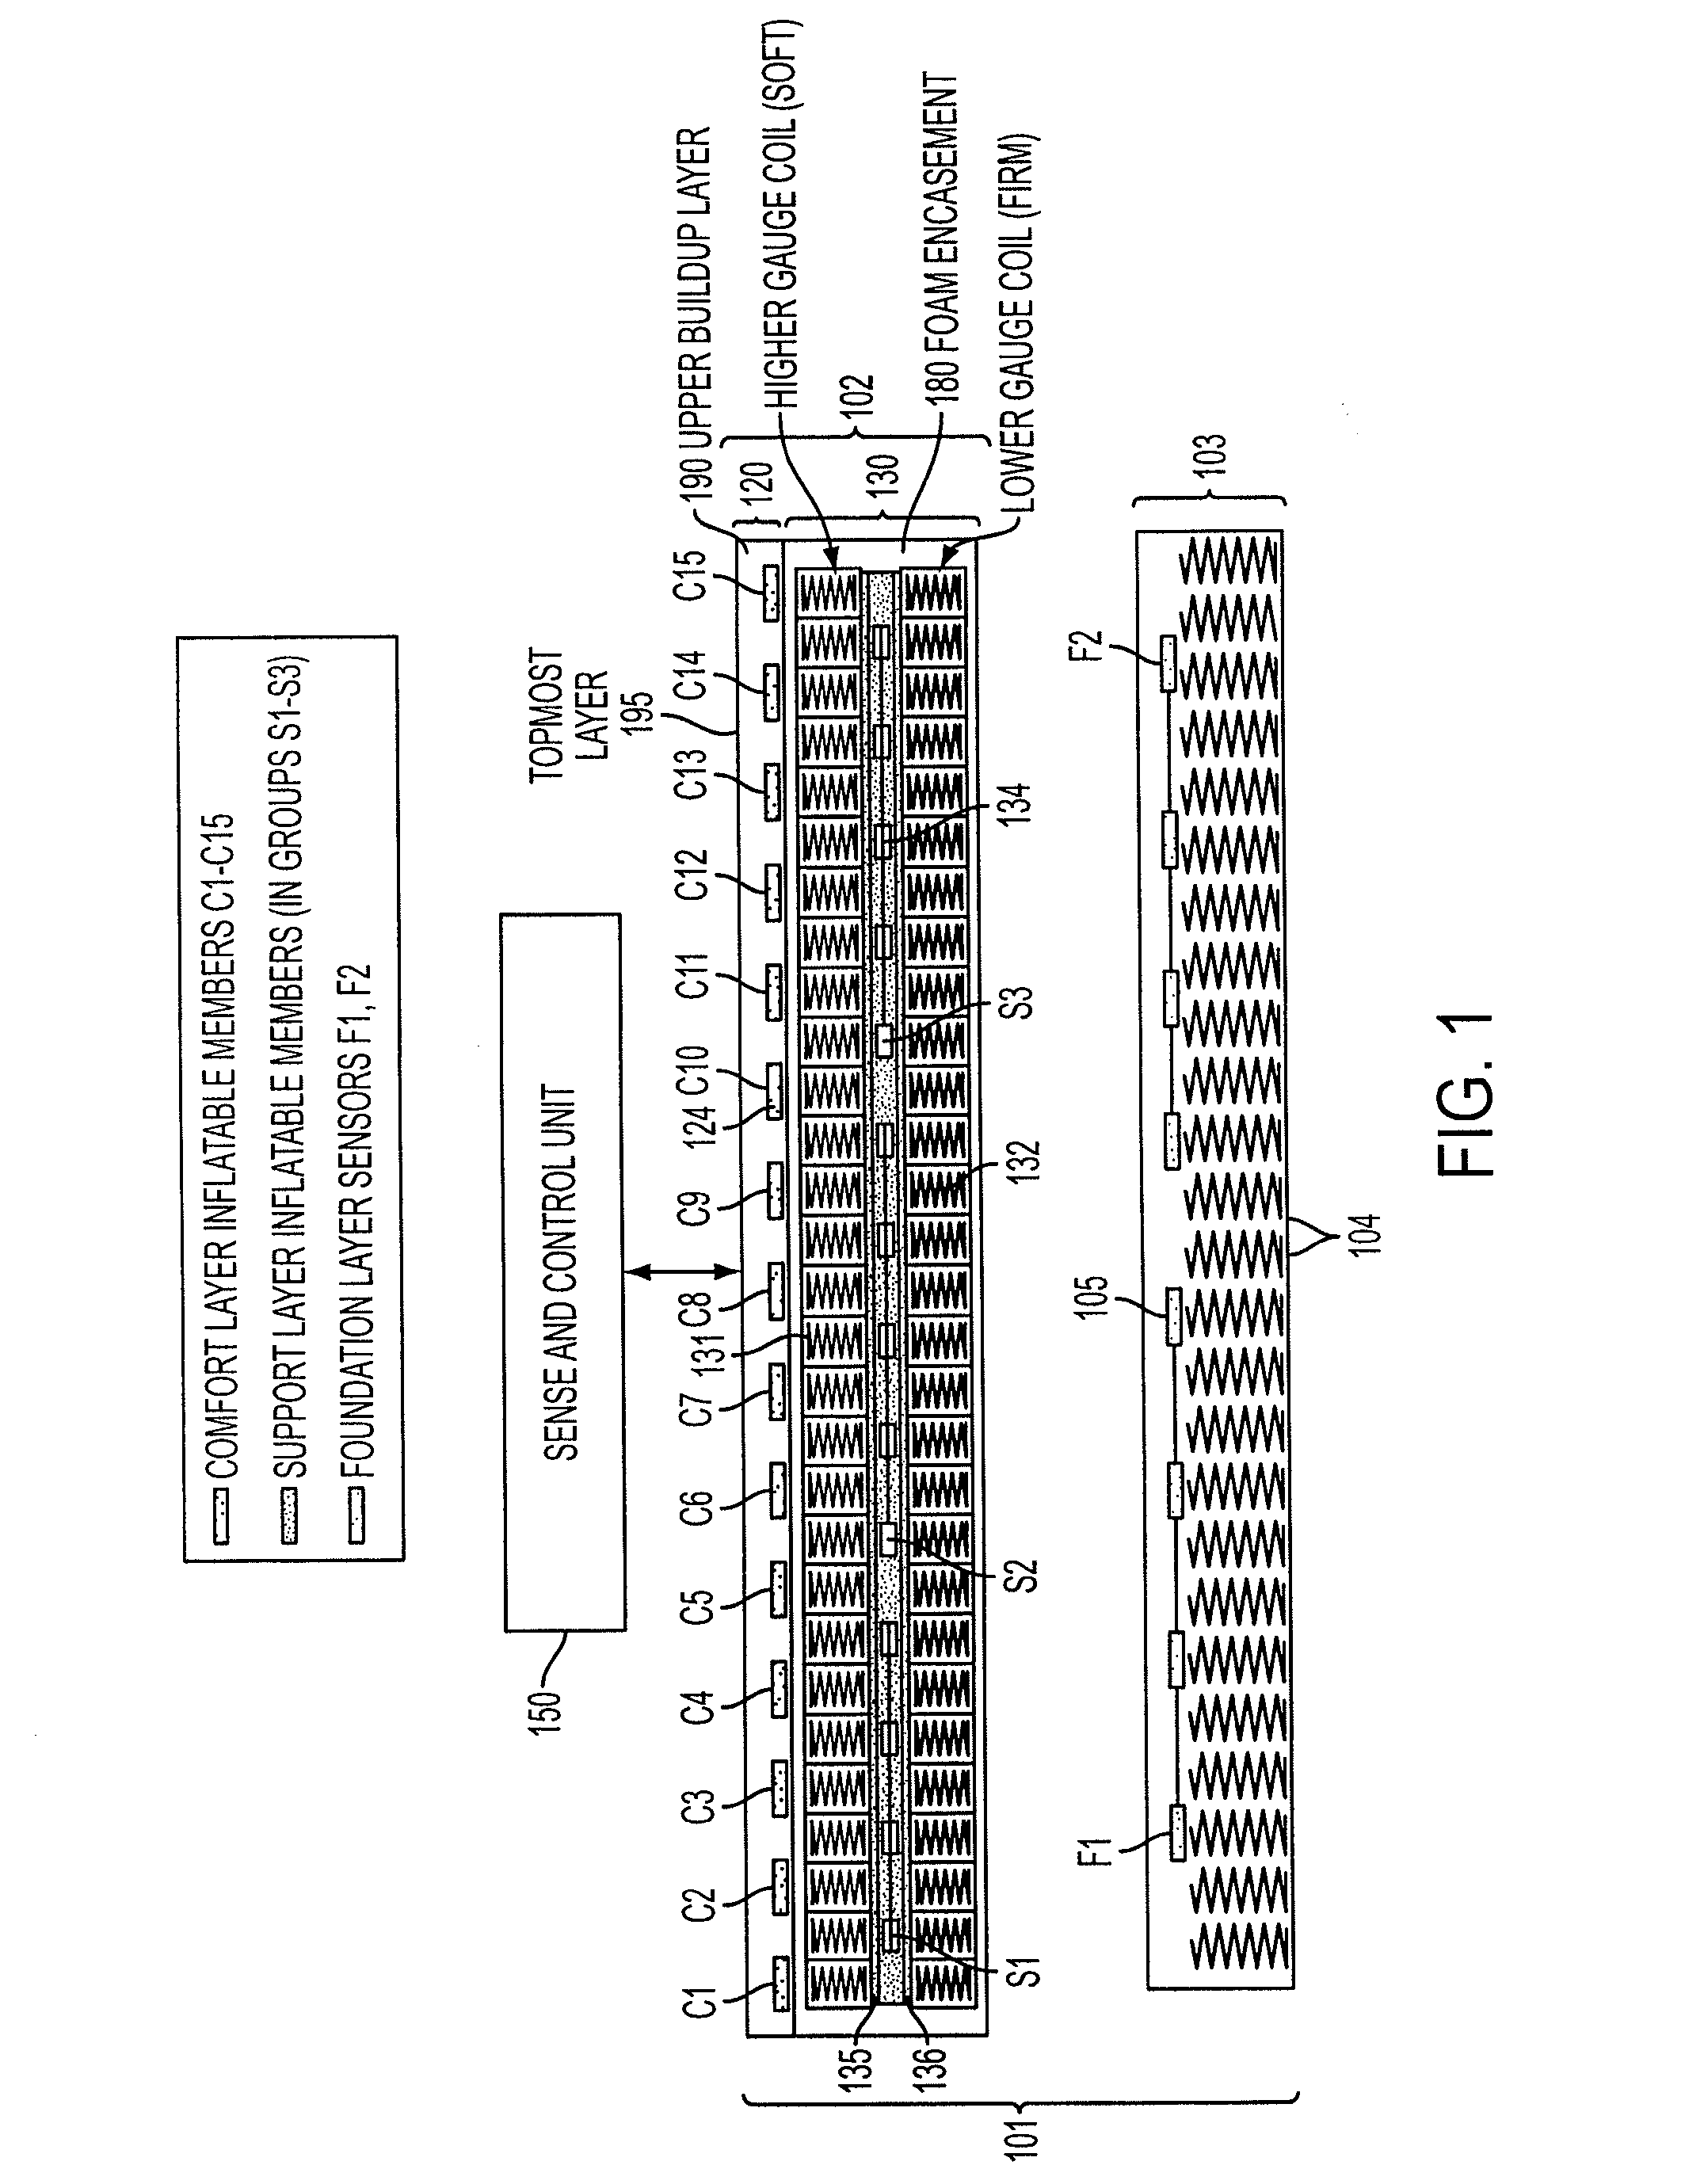 Apparatuses and methods for evaluating a person for a sleep system